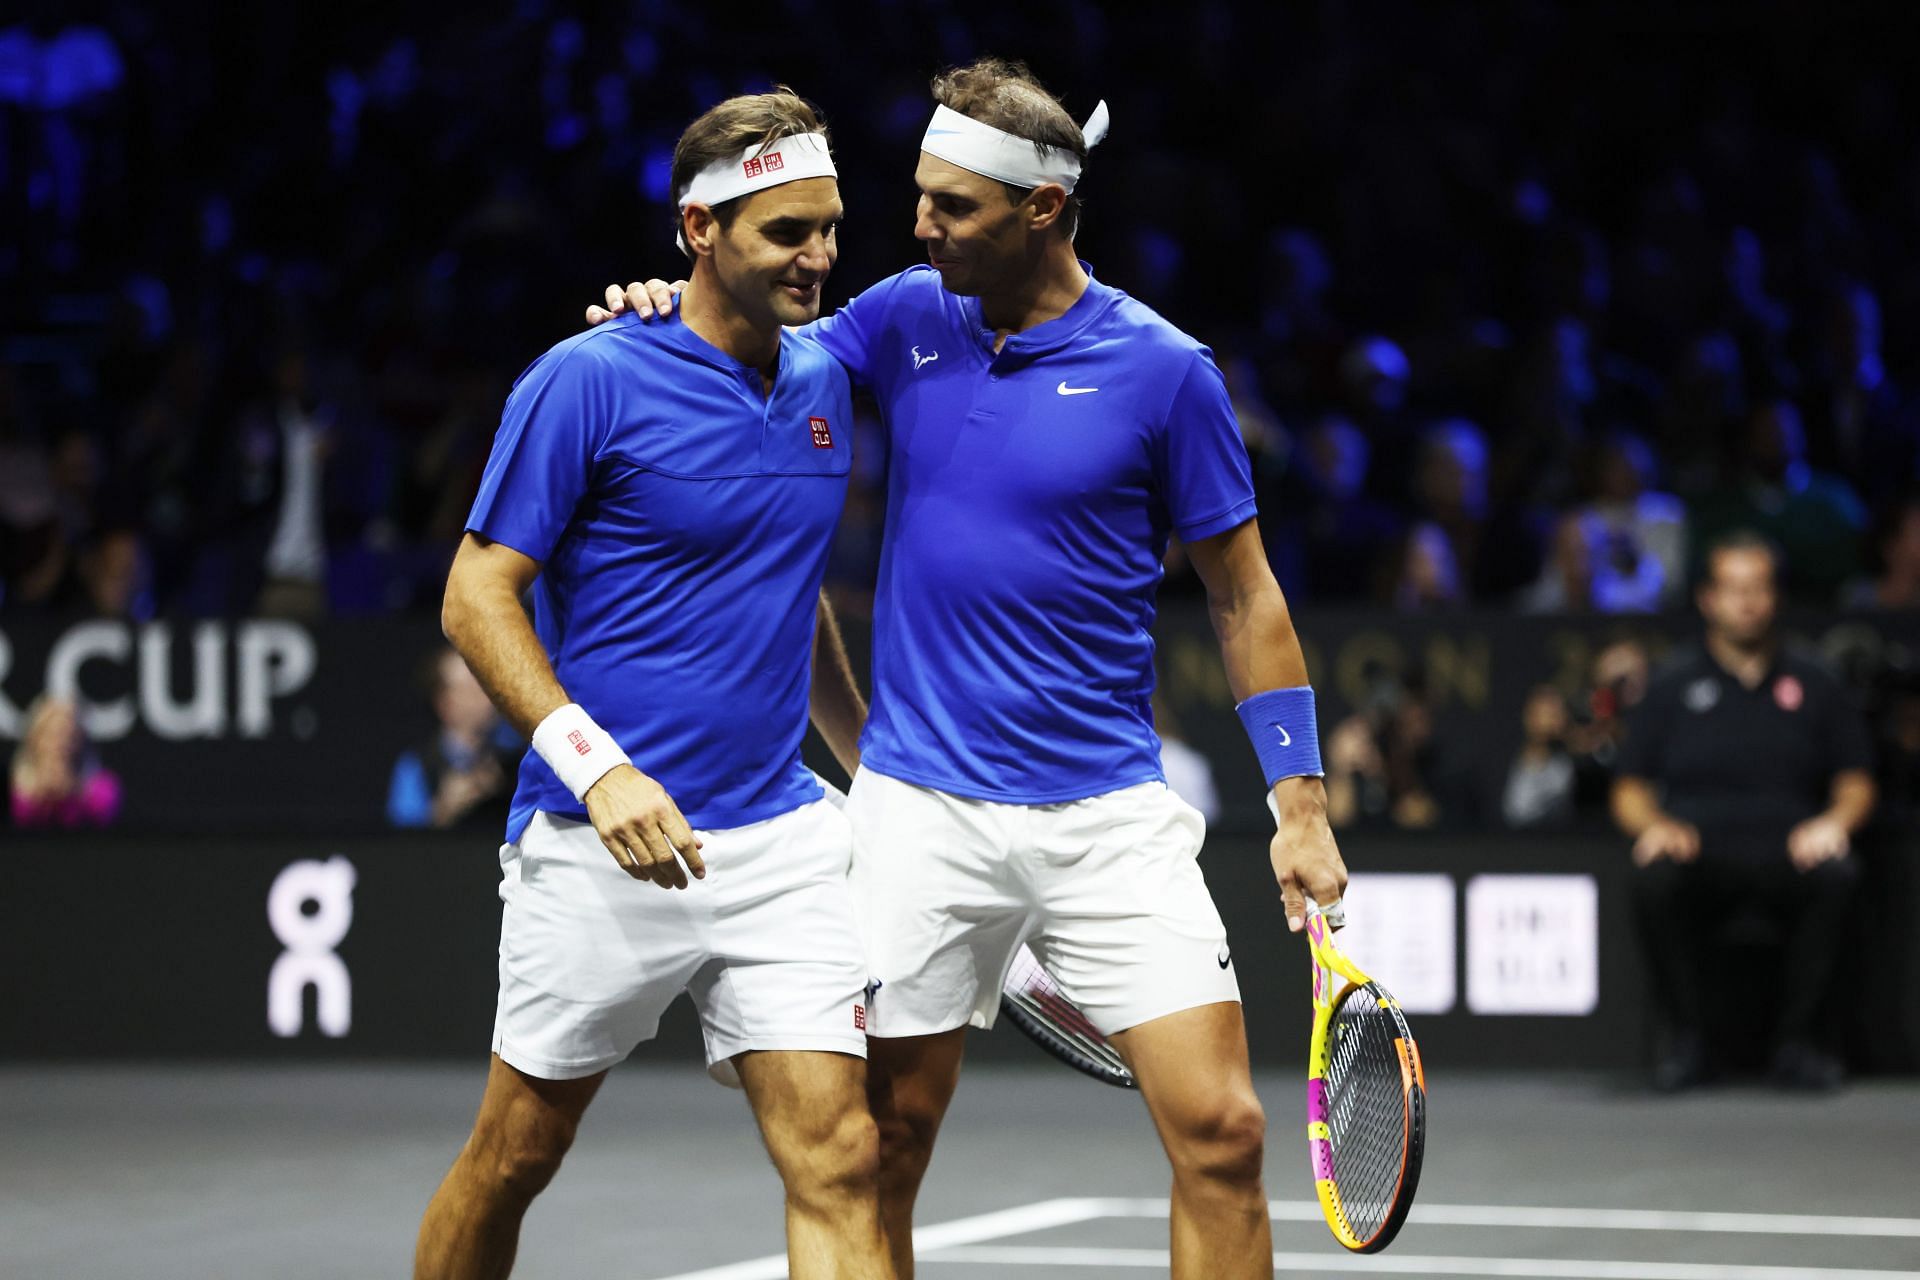 Rafael Nadal (R) pictured with Roger Federer at the tournament in 2022